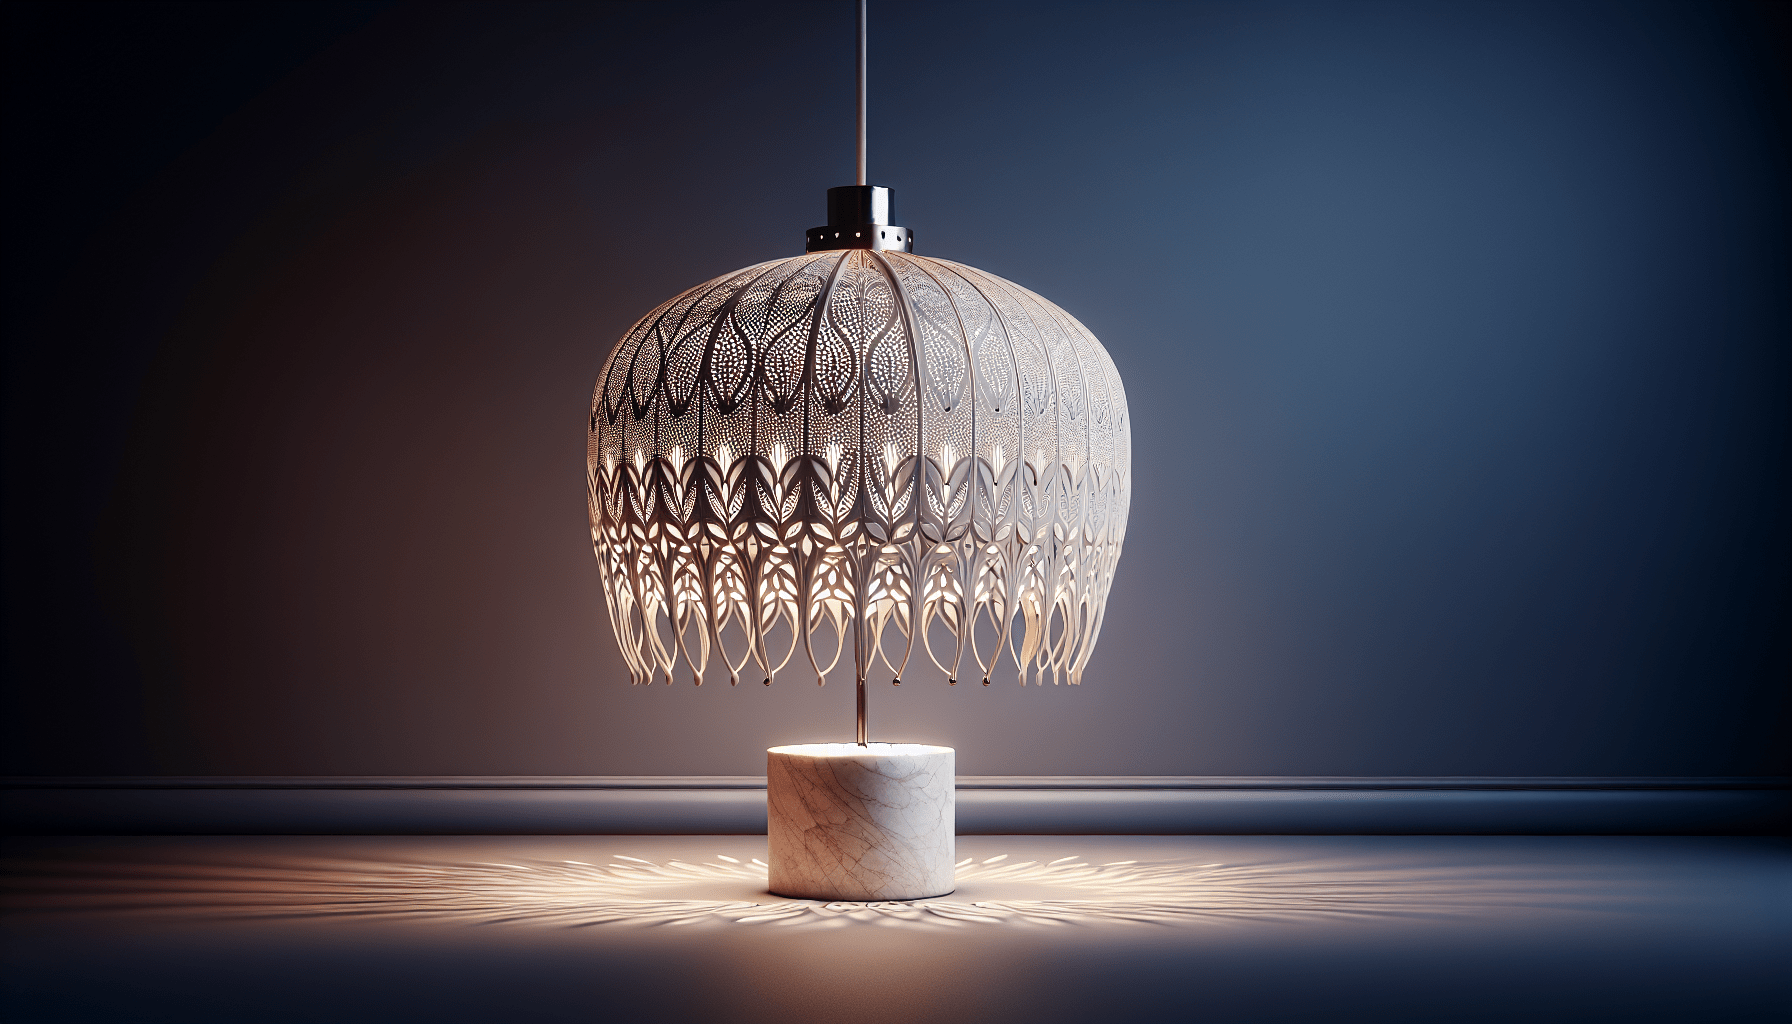 Introducing ‘Haibu’: Lampshades by Paolo Castelli Spa at Salone del Mobile